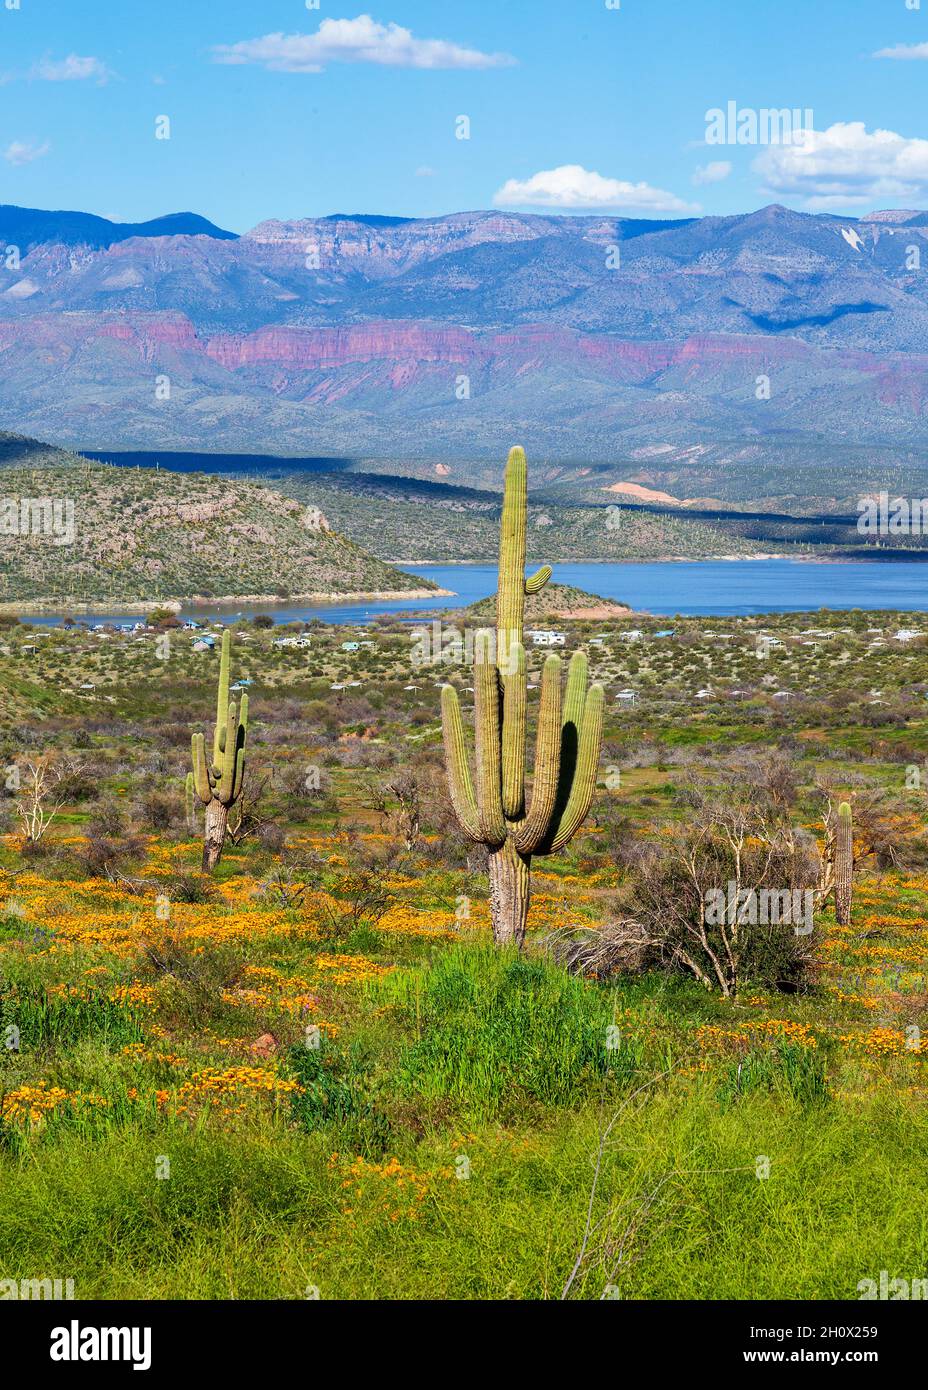 Saguaro Cacti and Wildflowers by Arizona Desert Lake in the Spring. Saguaros surrounded by field of California poppies by Roosevelt Lake reservoir. Stock Photo